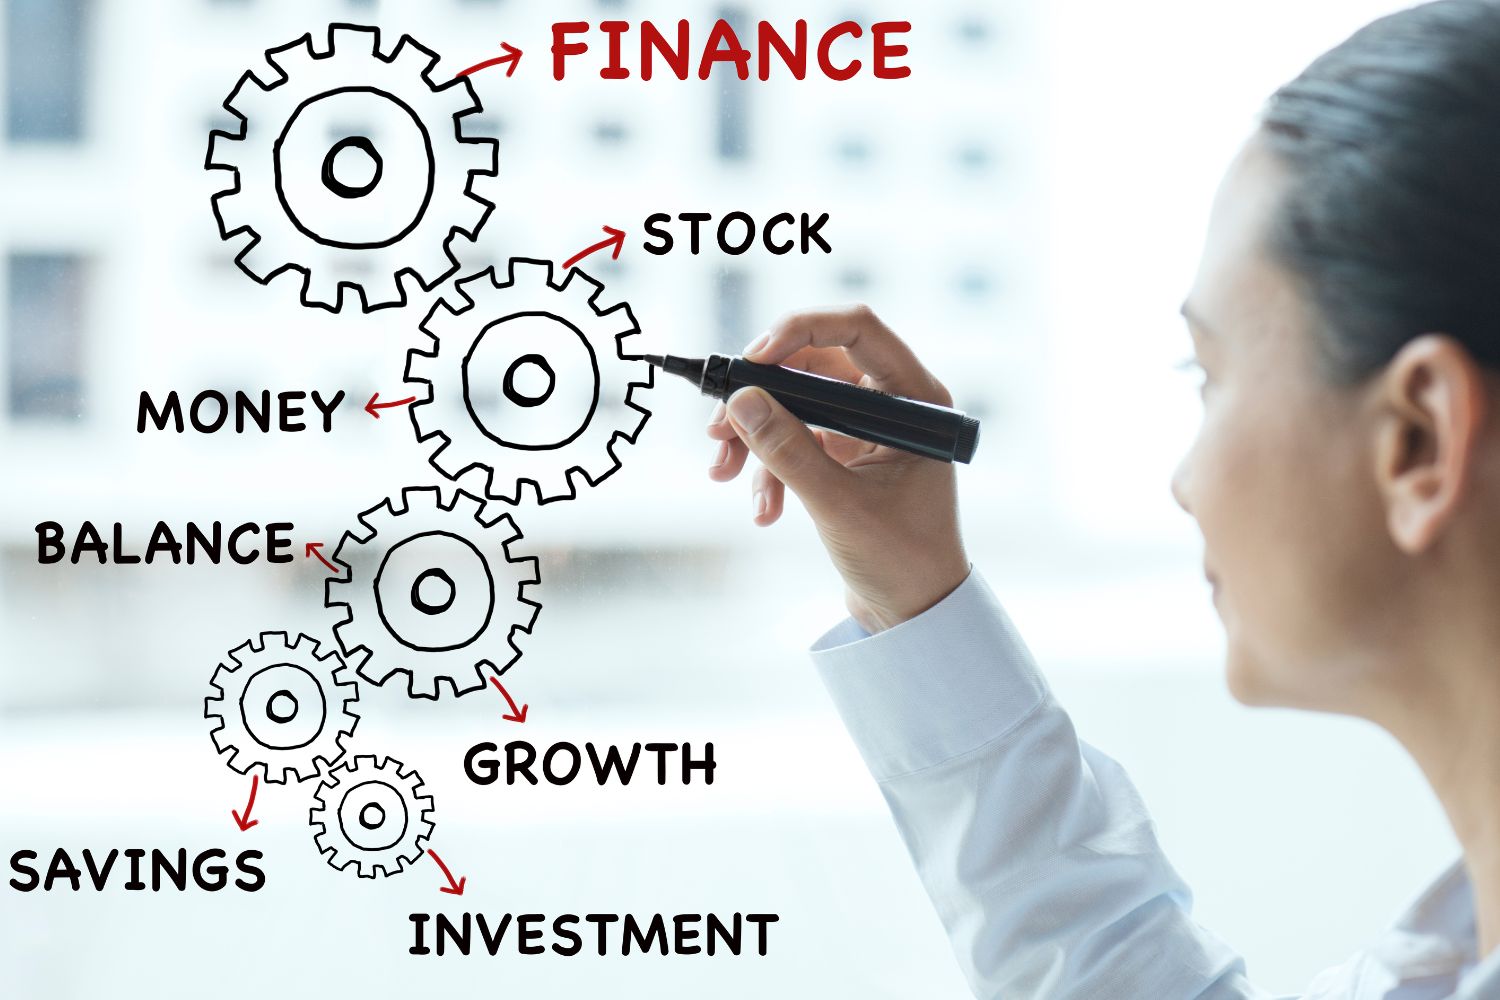 Benefits of Equipment Finance for Small Business